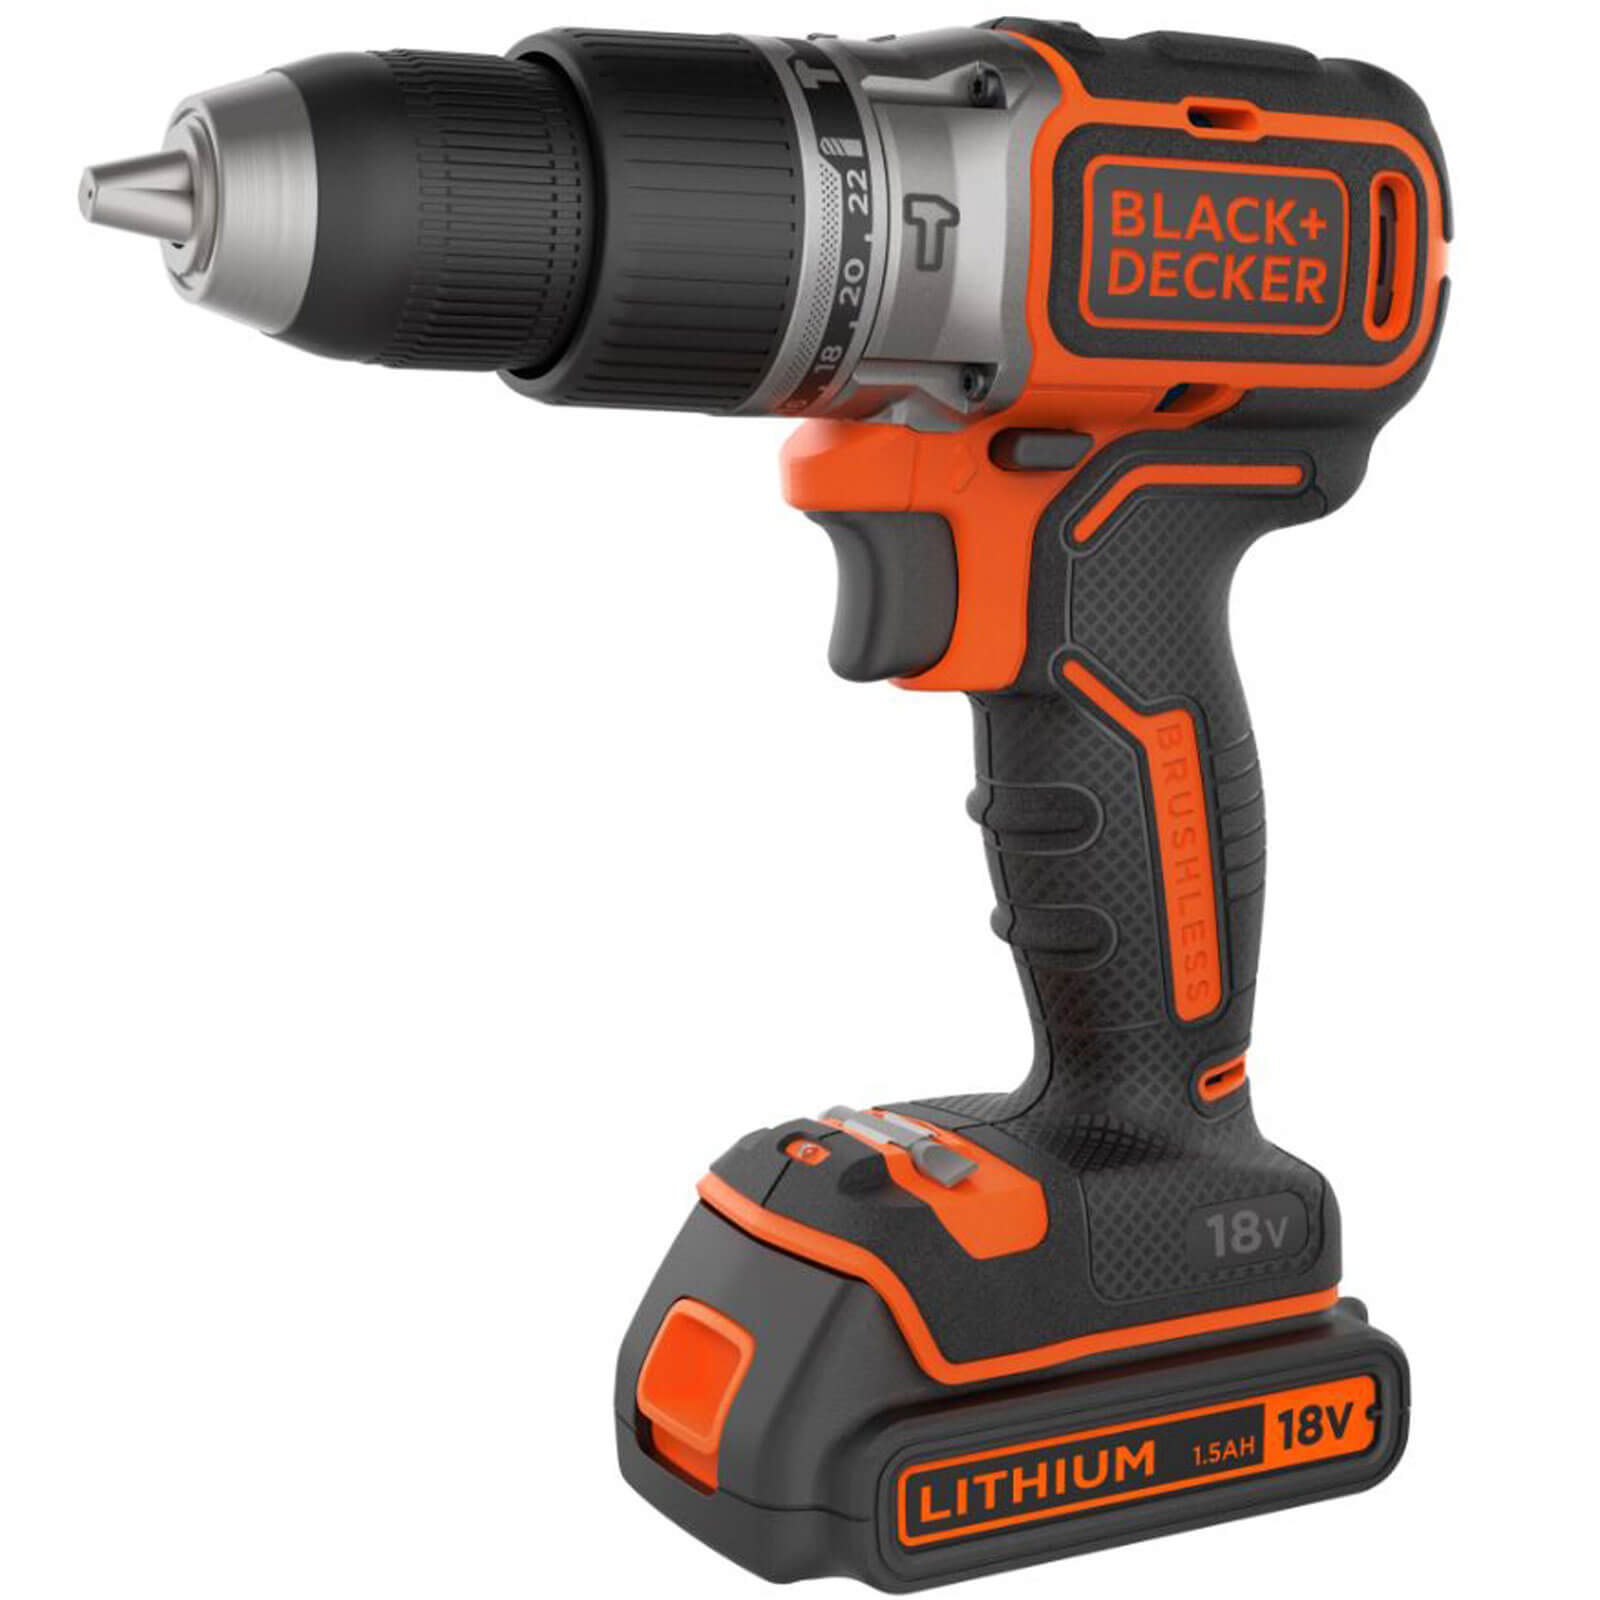 Image of Black and Decker BL188 18v Cordless Brushless Combi Drill 1 x 1.5ah Li-ion Charger No Case